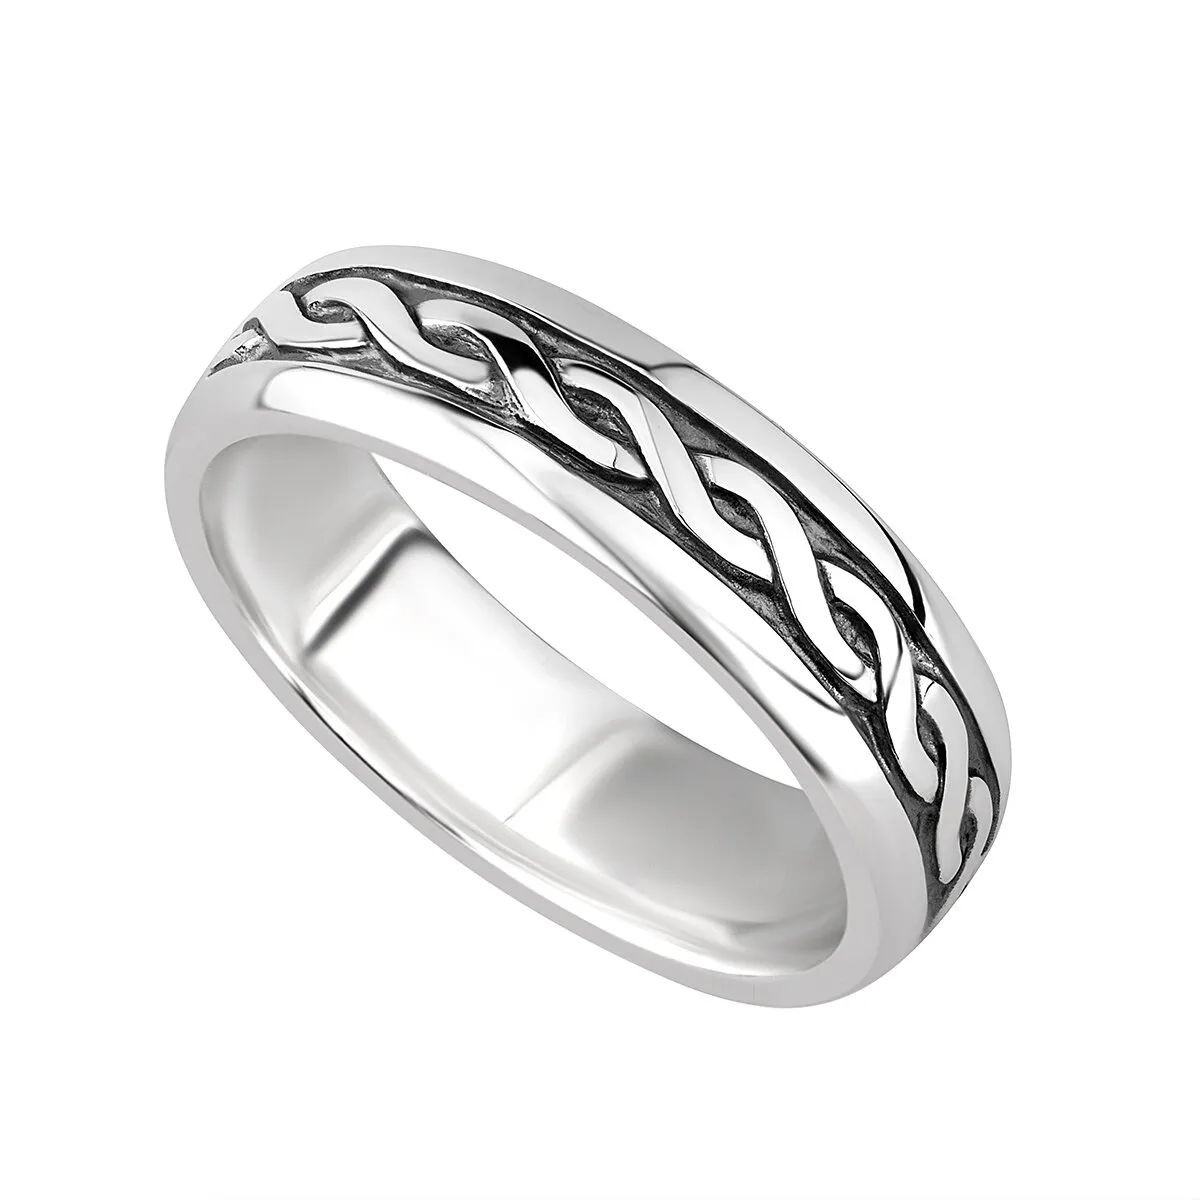 Ladies Sterling Silver Celtic Ring0